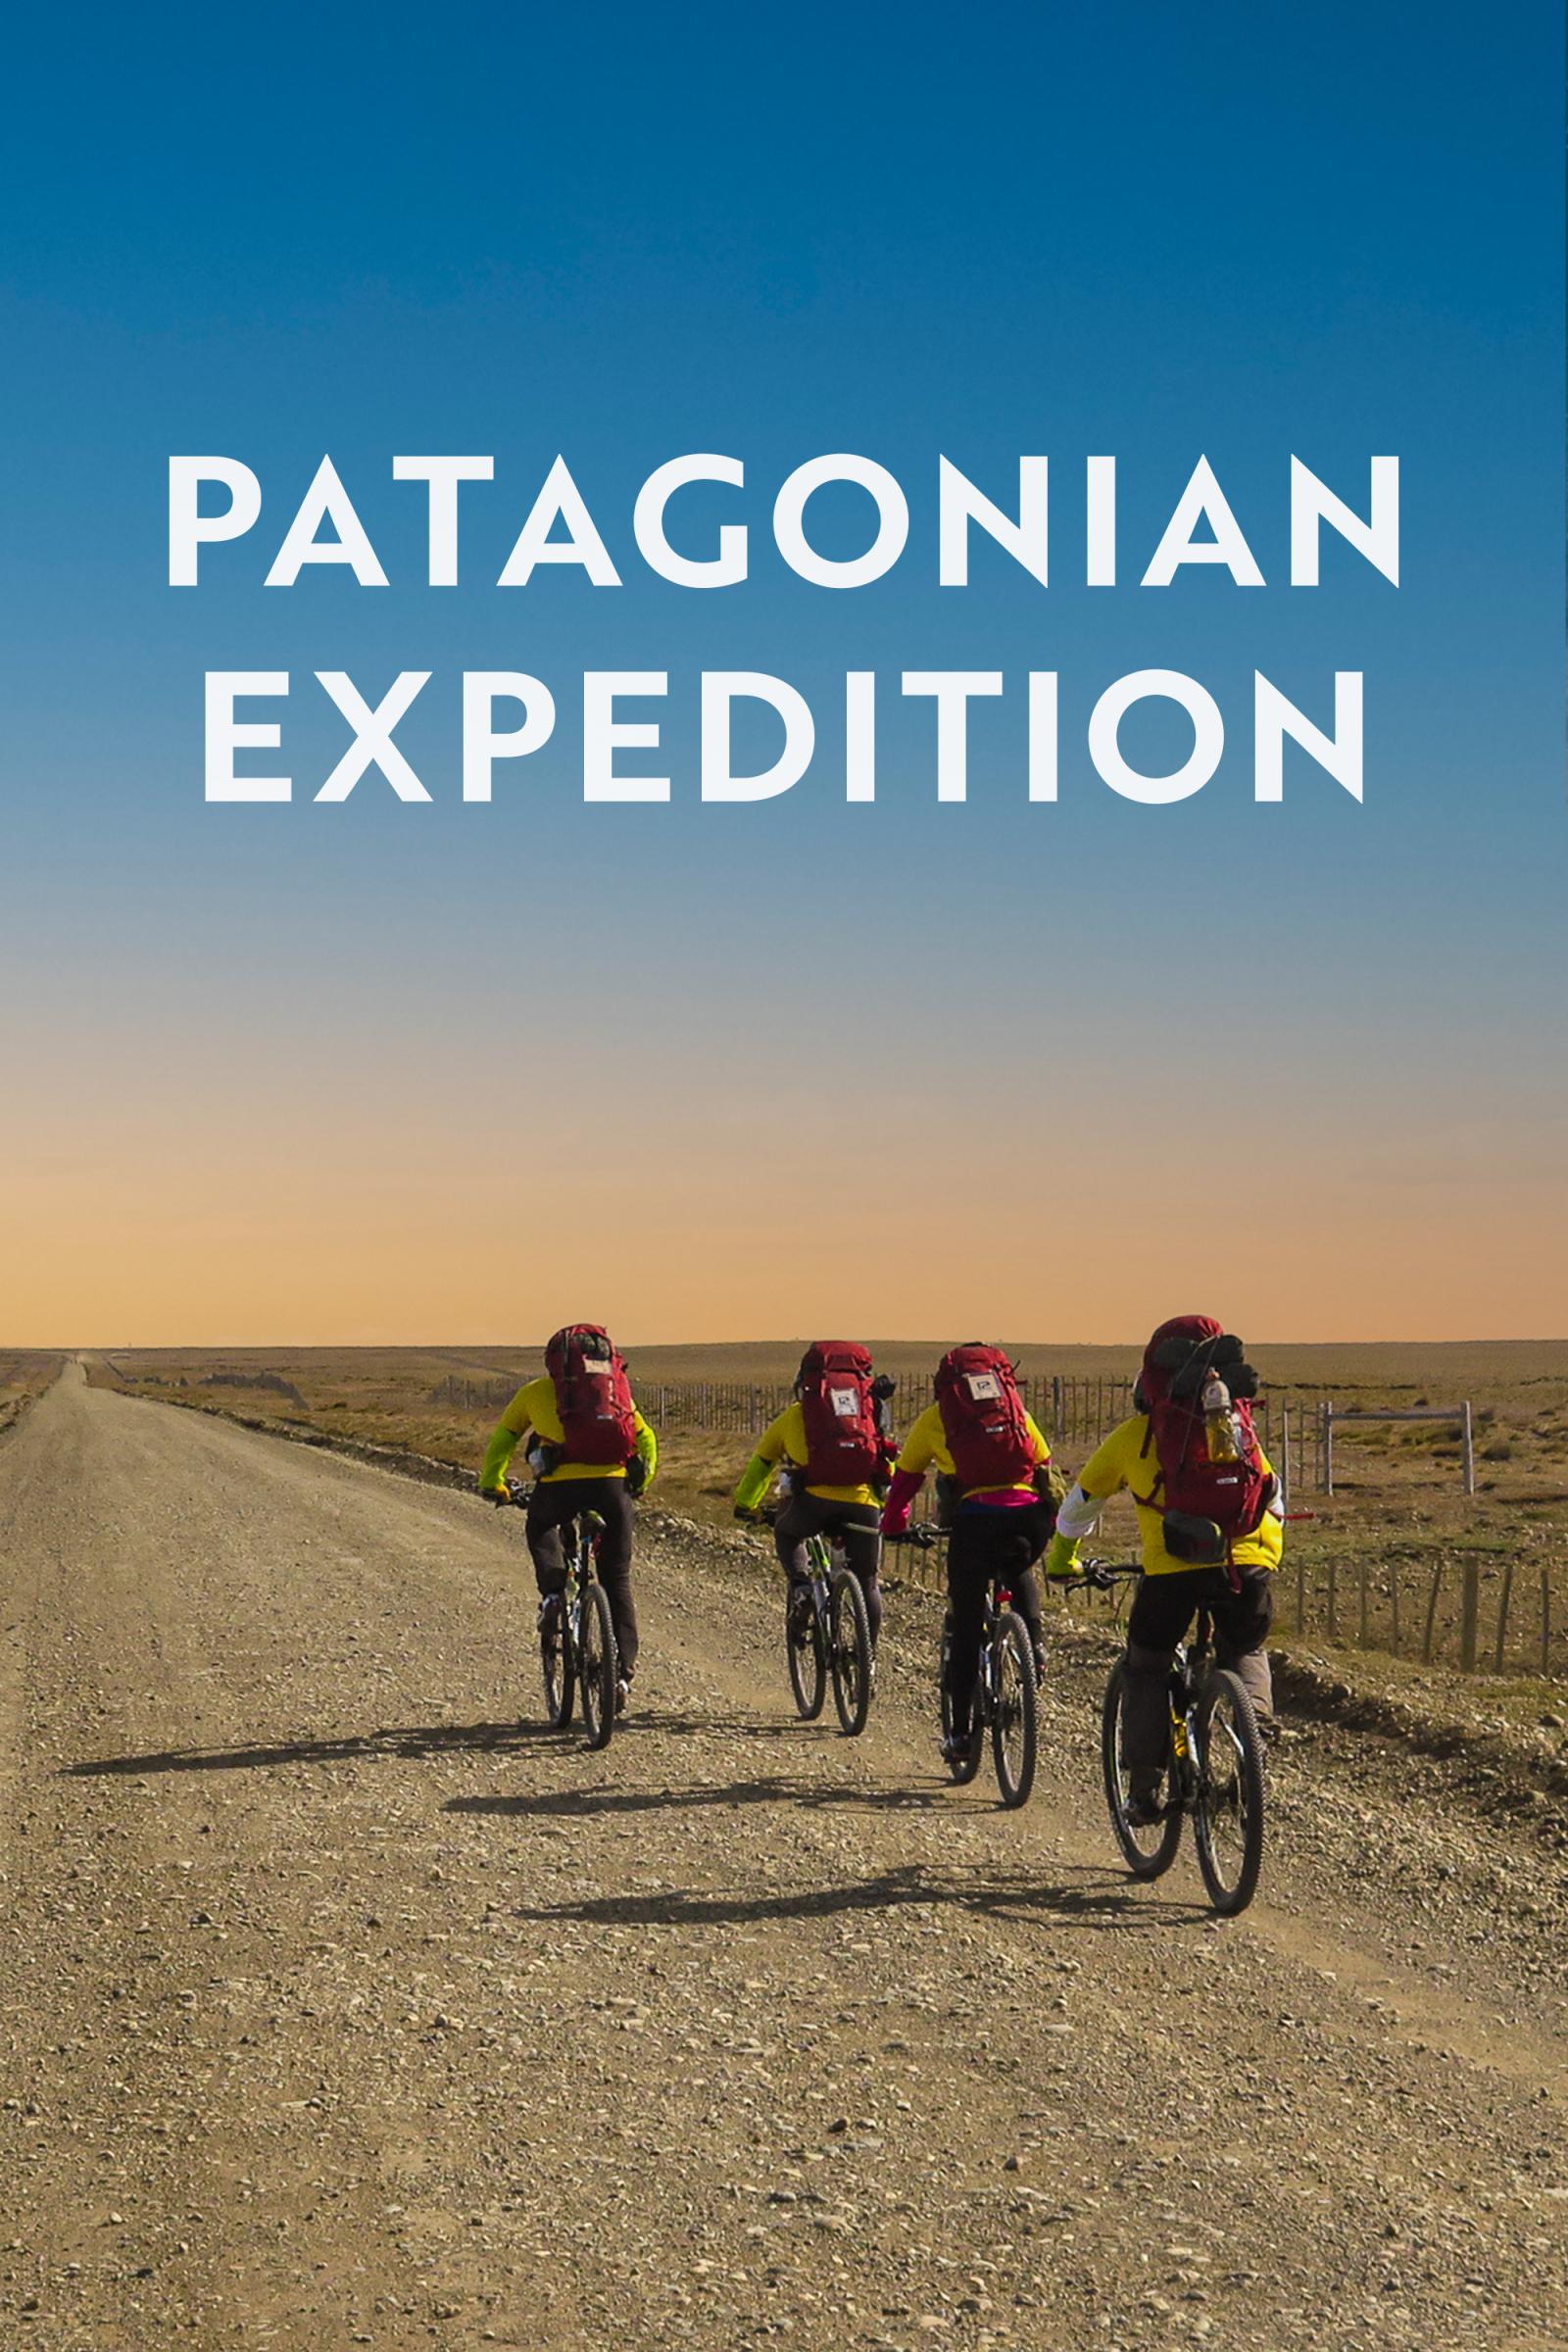 Where to stream Patagonian Expedition Race